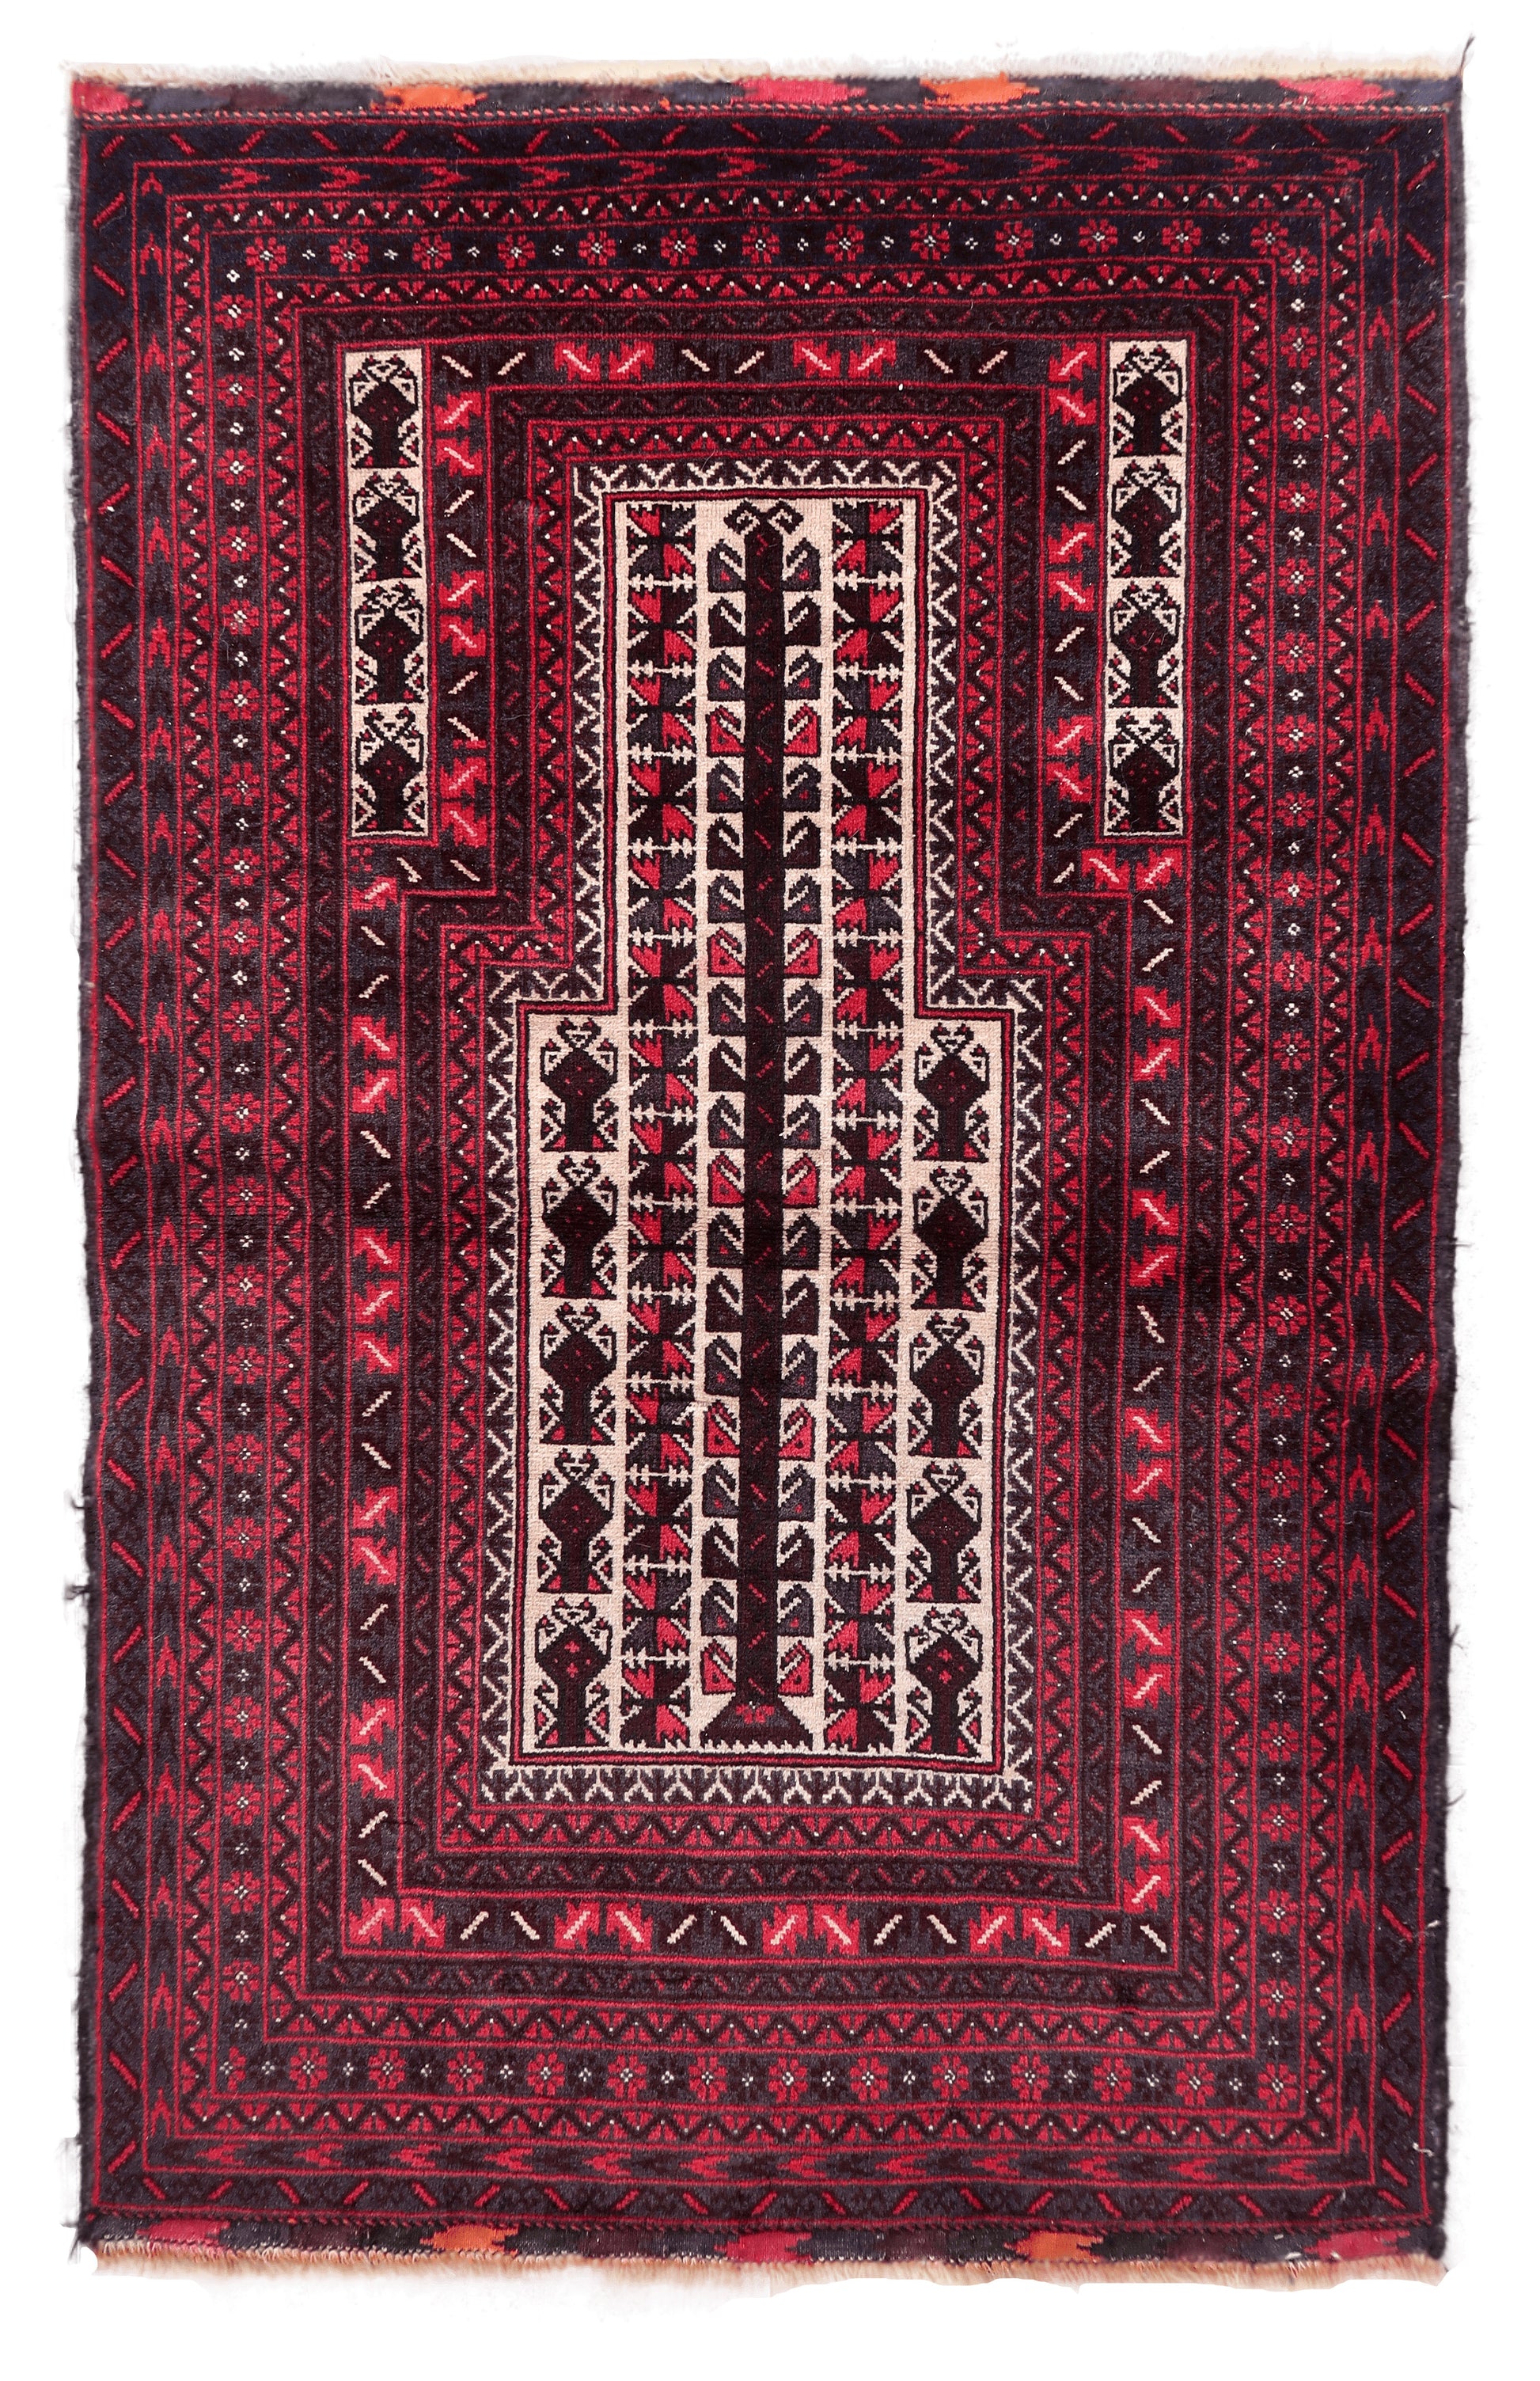 Handmade Vintage Afghan Baluch Prayer Rug with Cream, Red, Purple, and Burgundy Colors, 2.6' x 4.5'